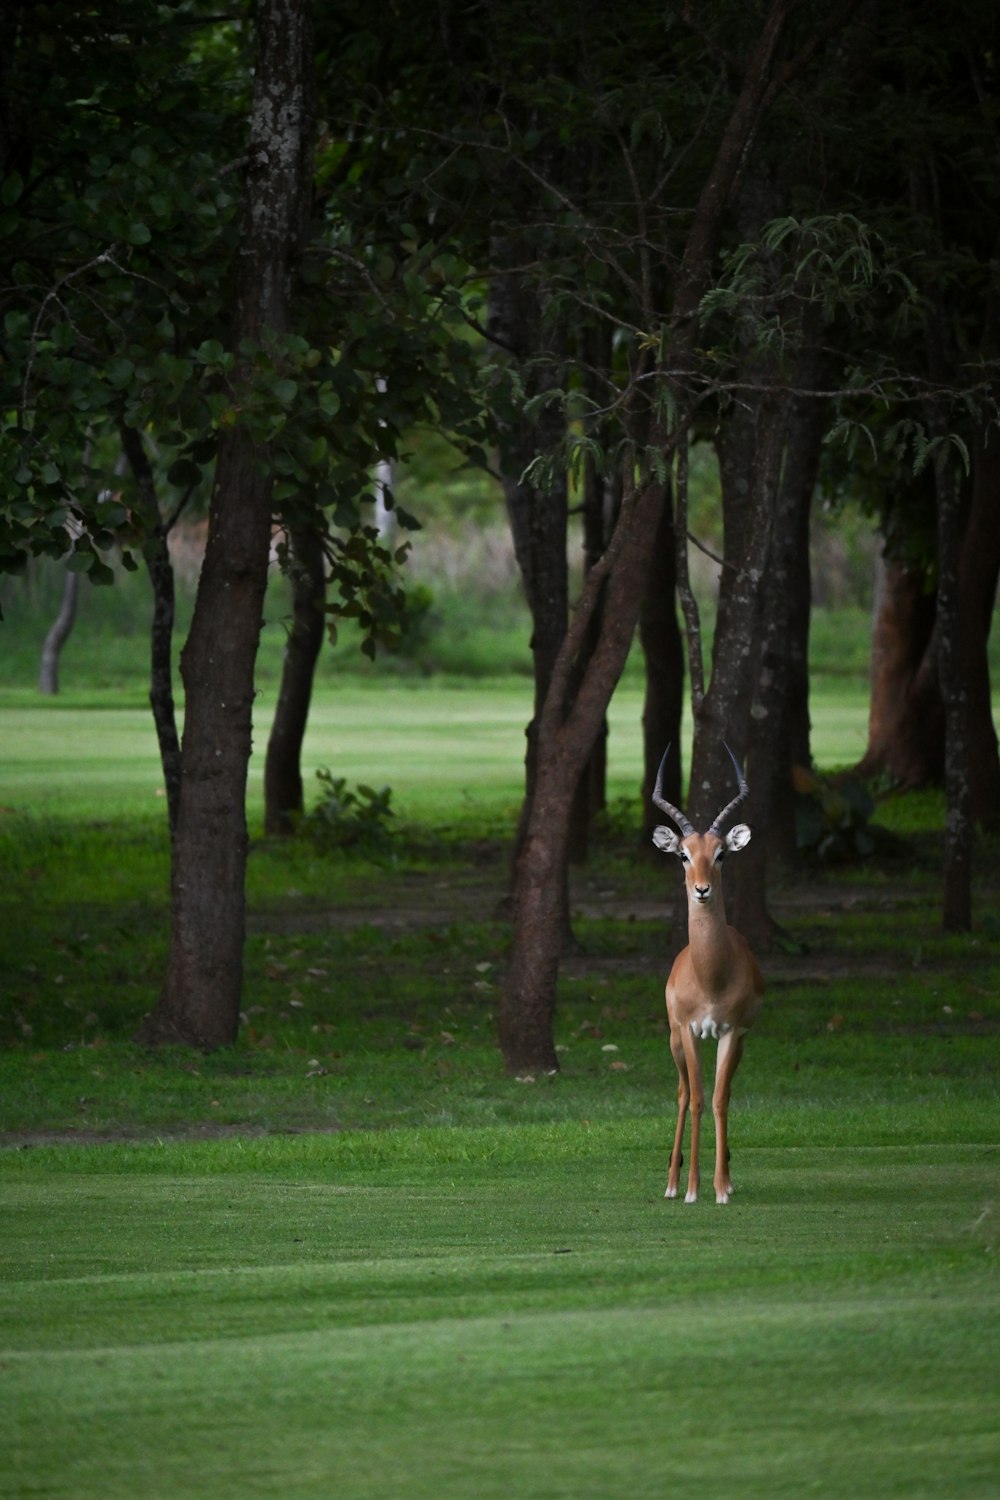 a deer standing in the middle of a lush green field